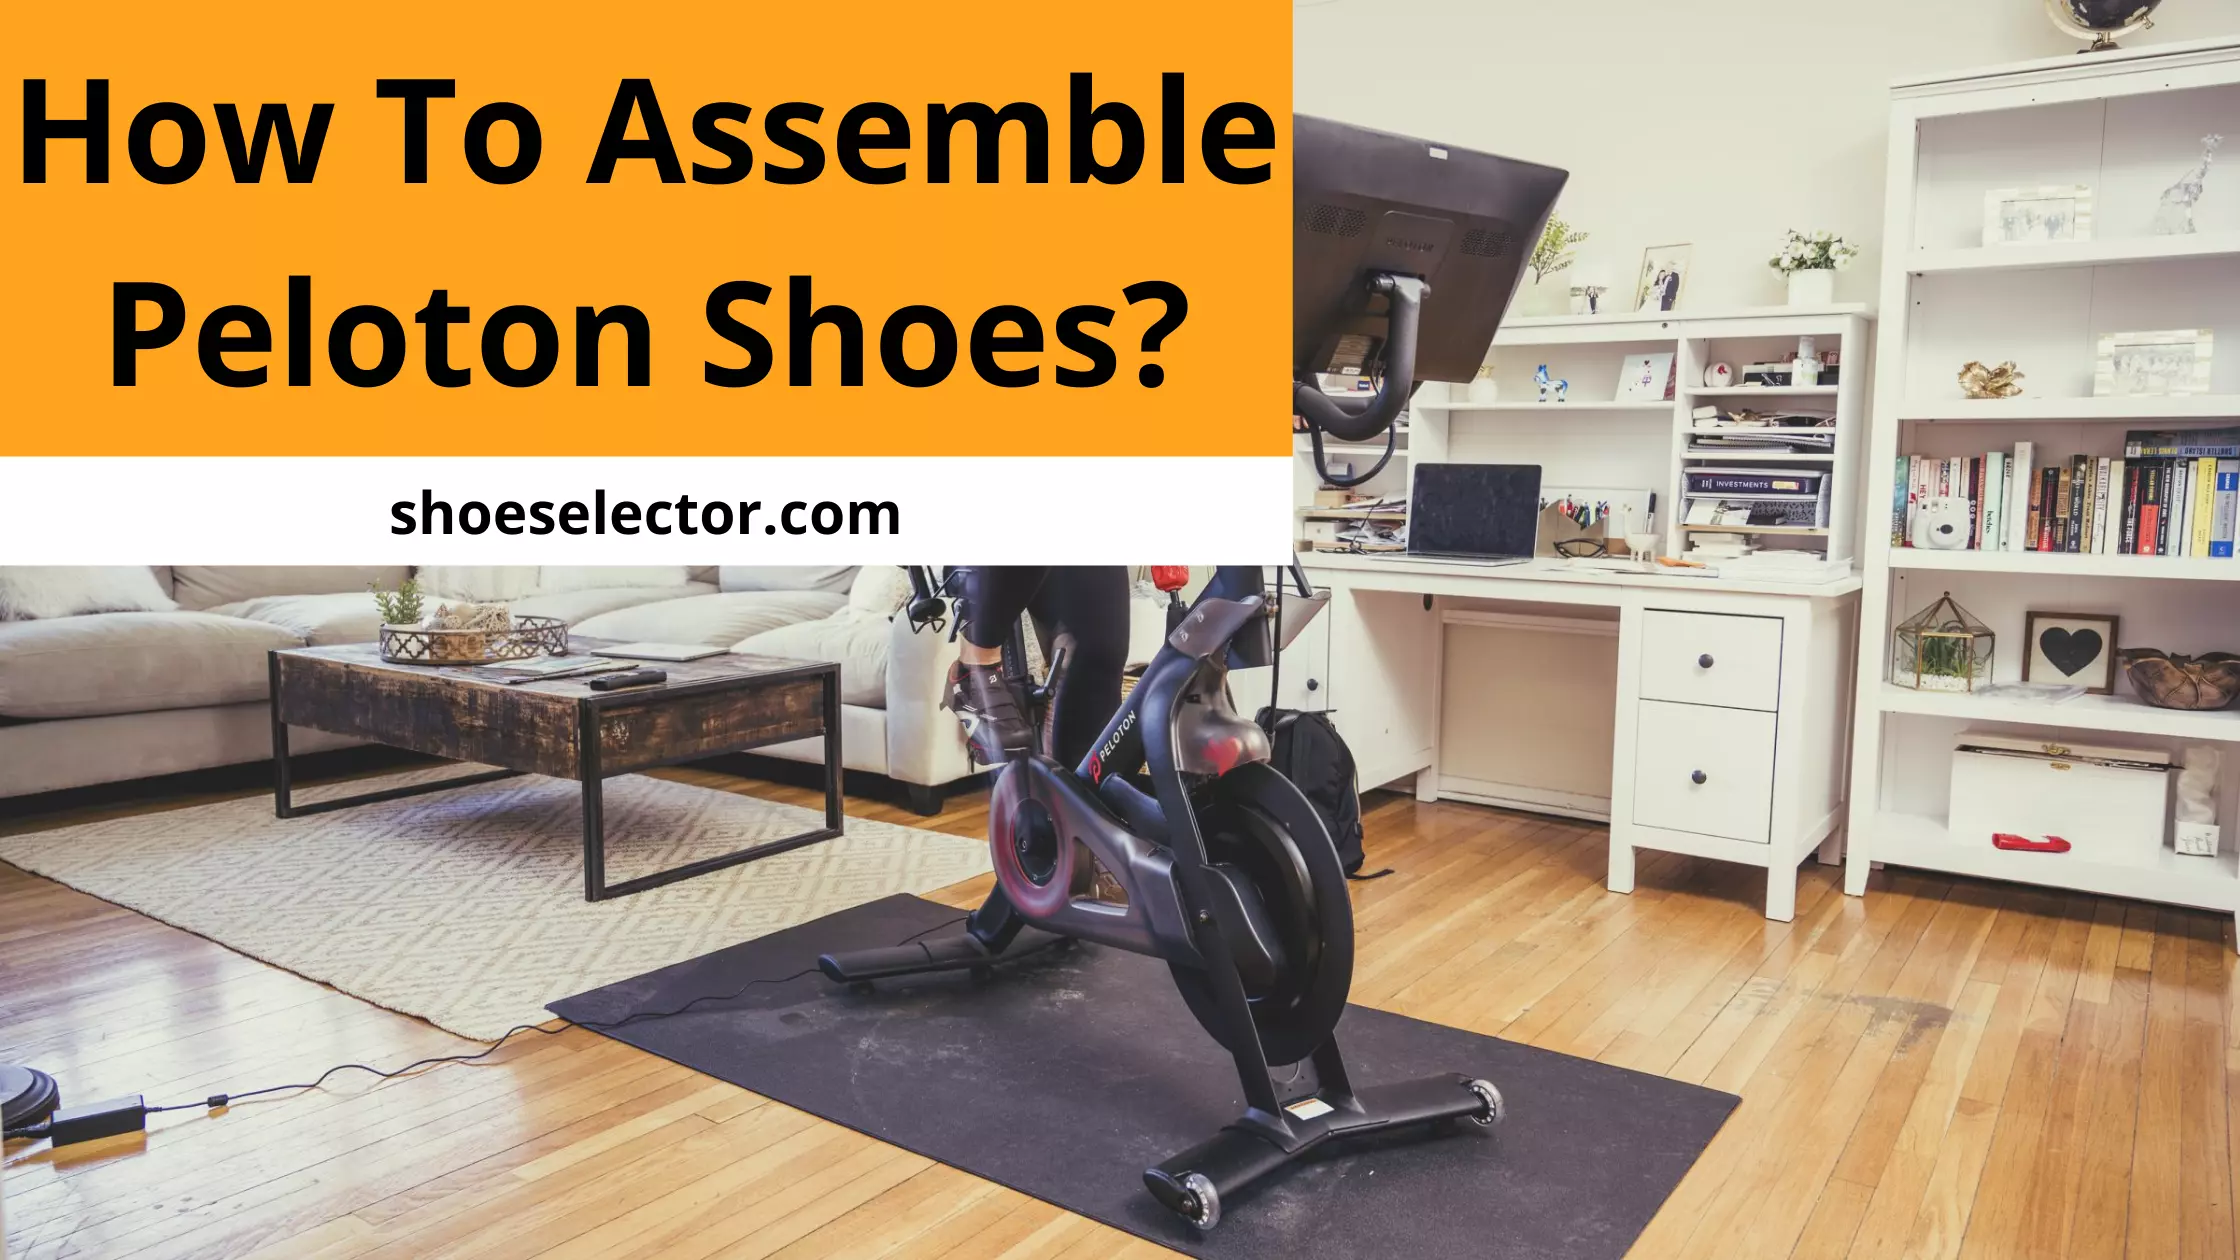 How To Assemble Peloton Shoes? 8 Simple Step-By-Step Guide